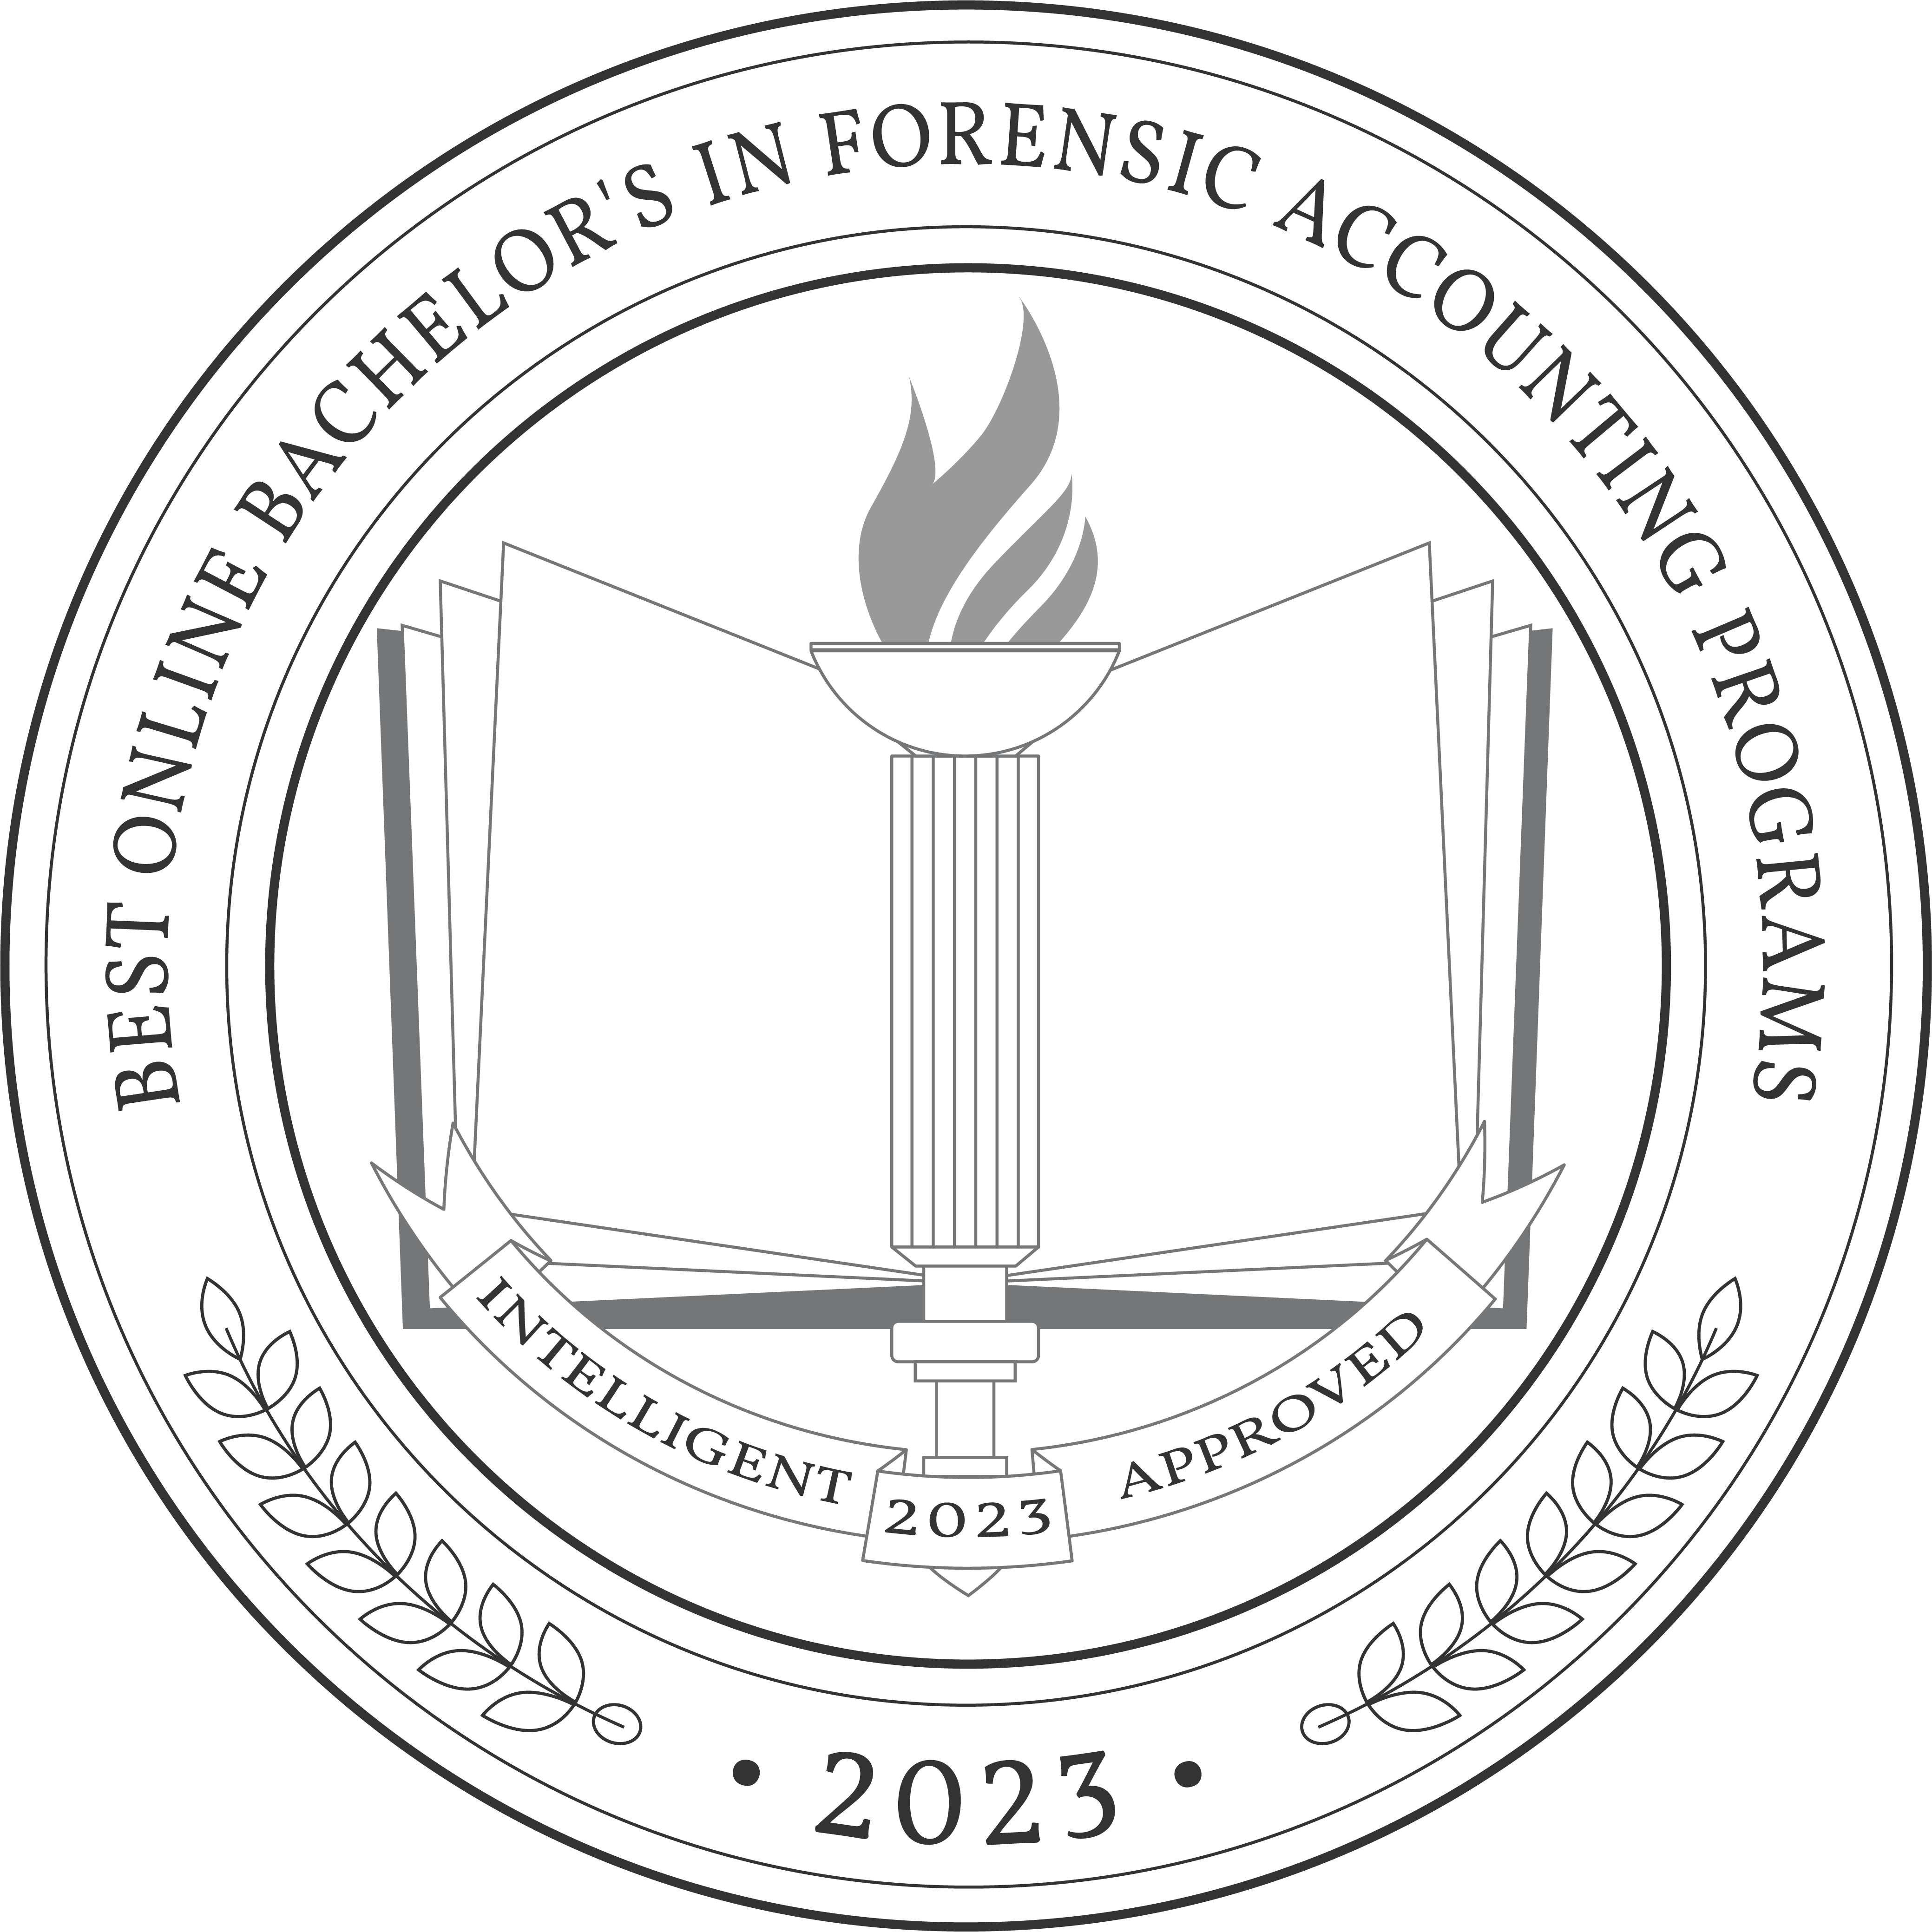 Best Online Bachelor's in Forensic Accounting Programs badge